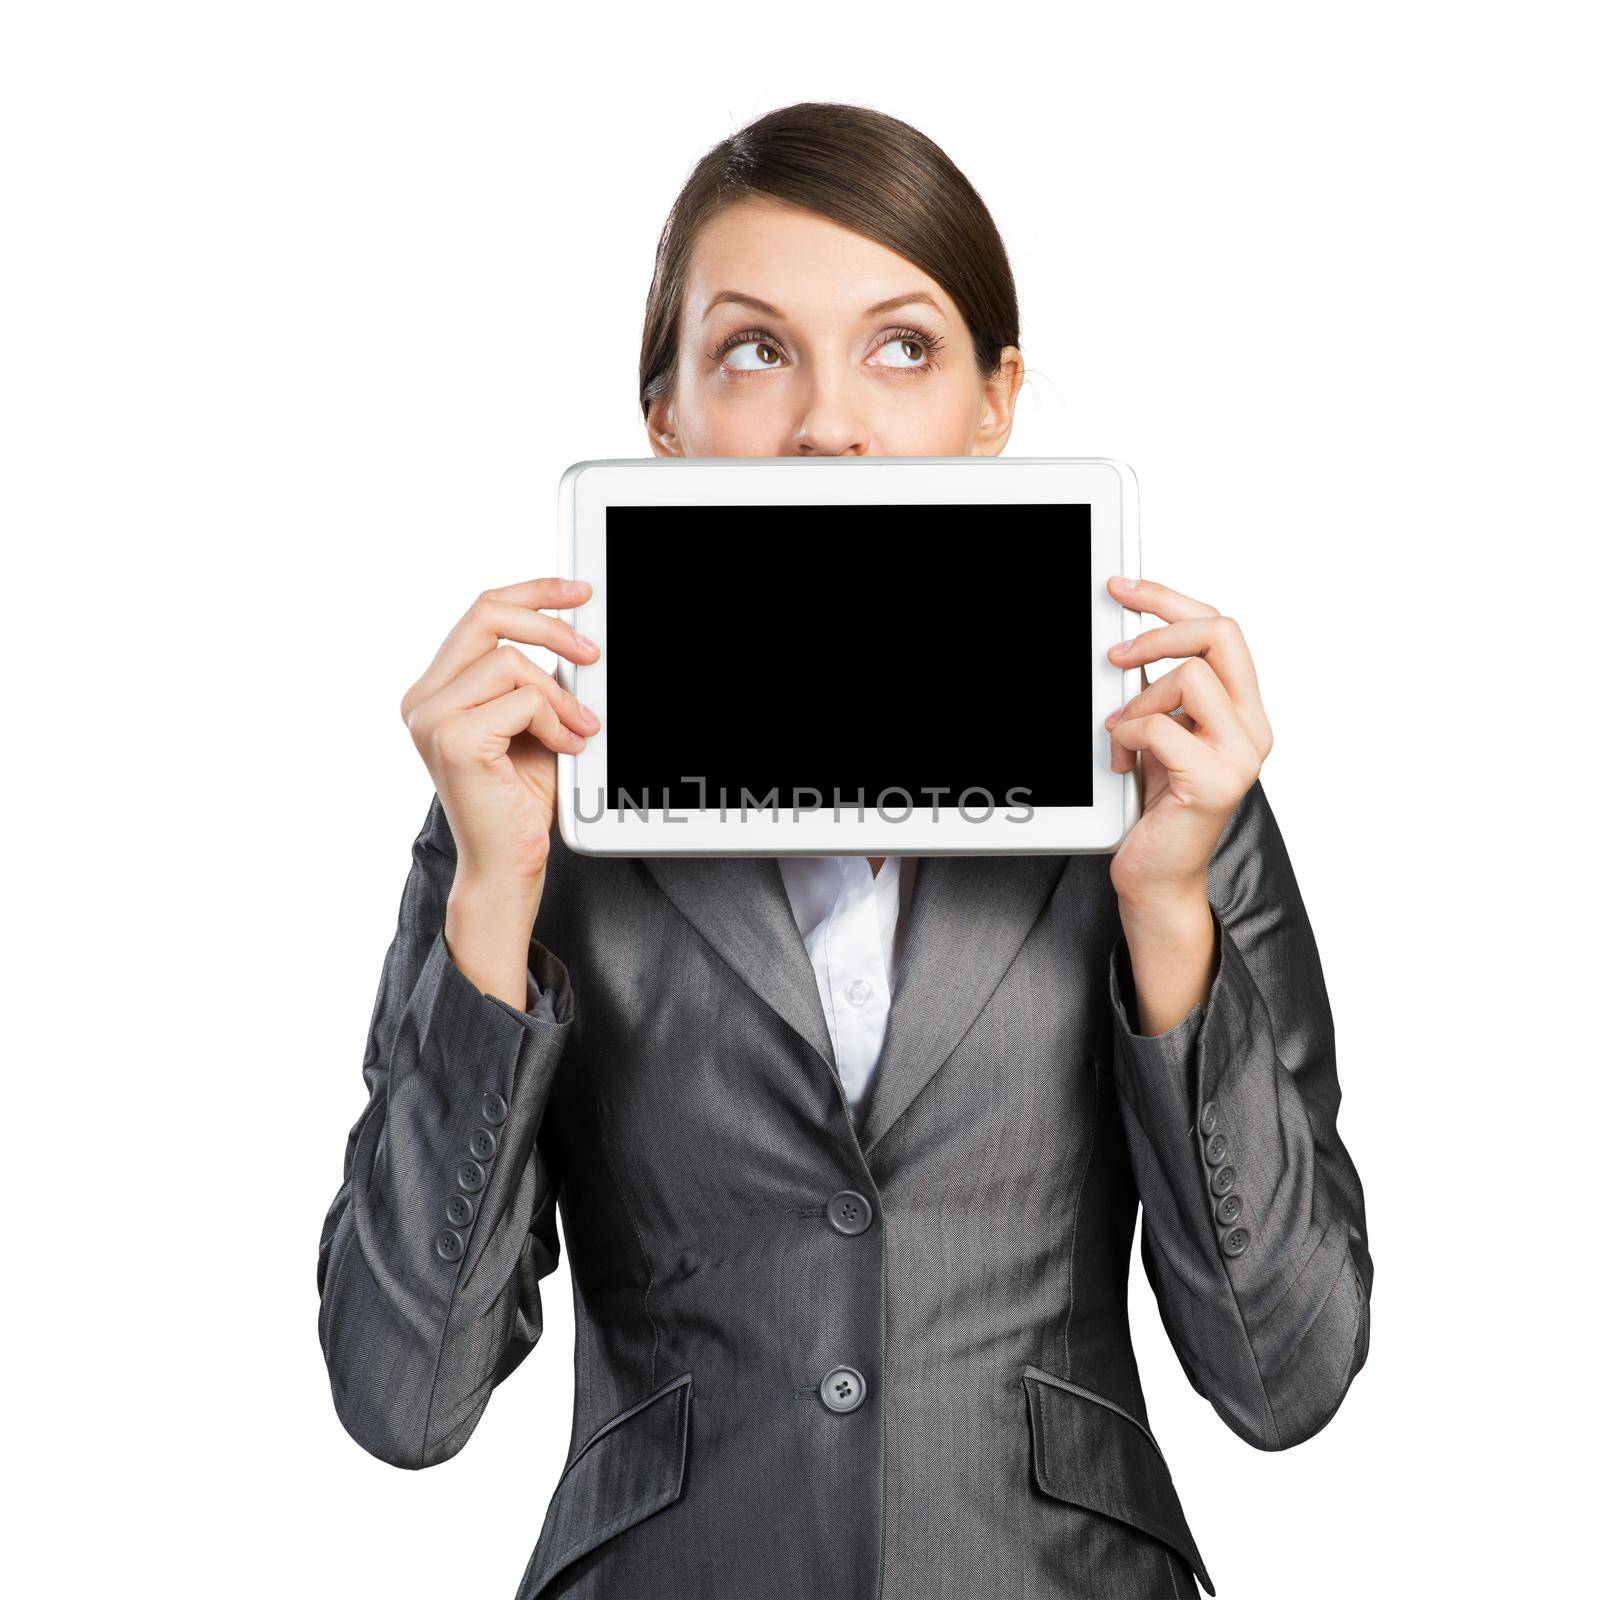 Businesswoman with tablet computer looking upwards. Portrait of attractive woman in formalwear showing tablet PC near her face. Corporate businessperson and digital technology layout with copy space